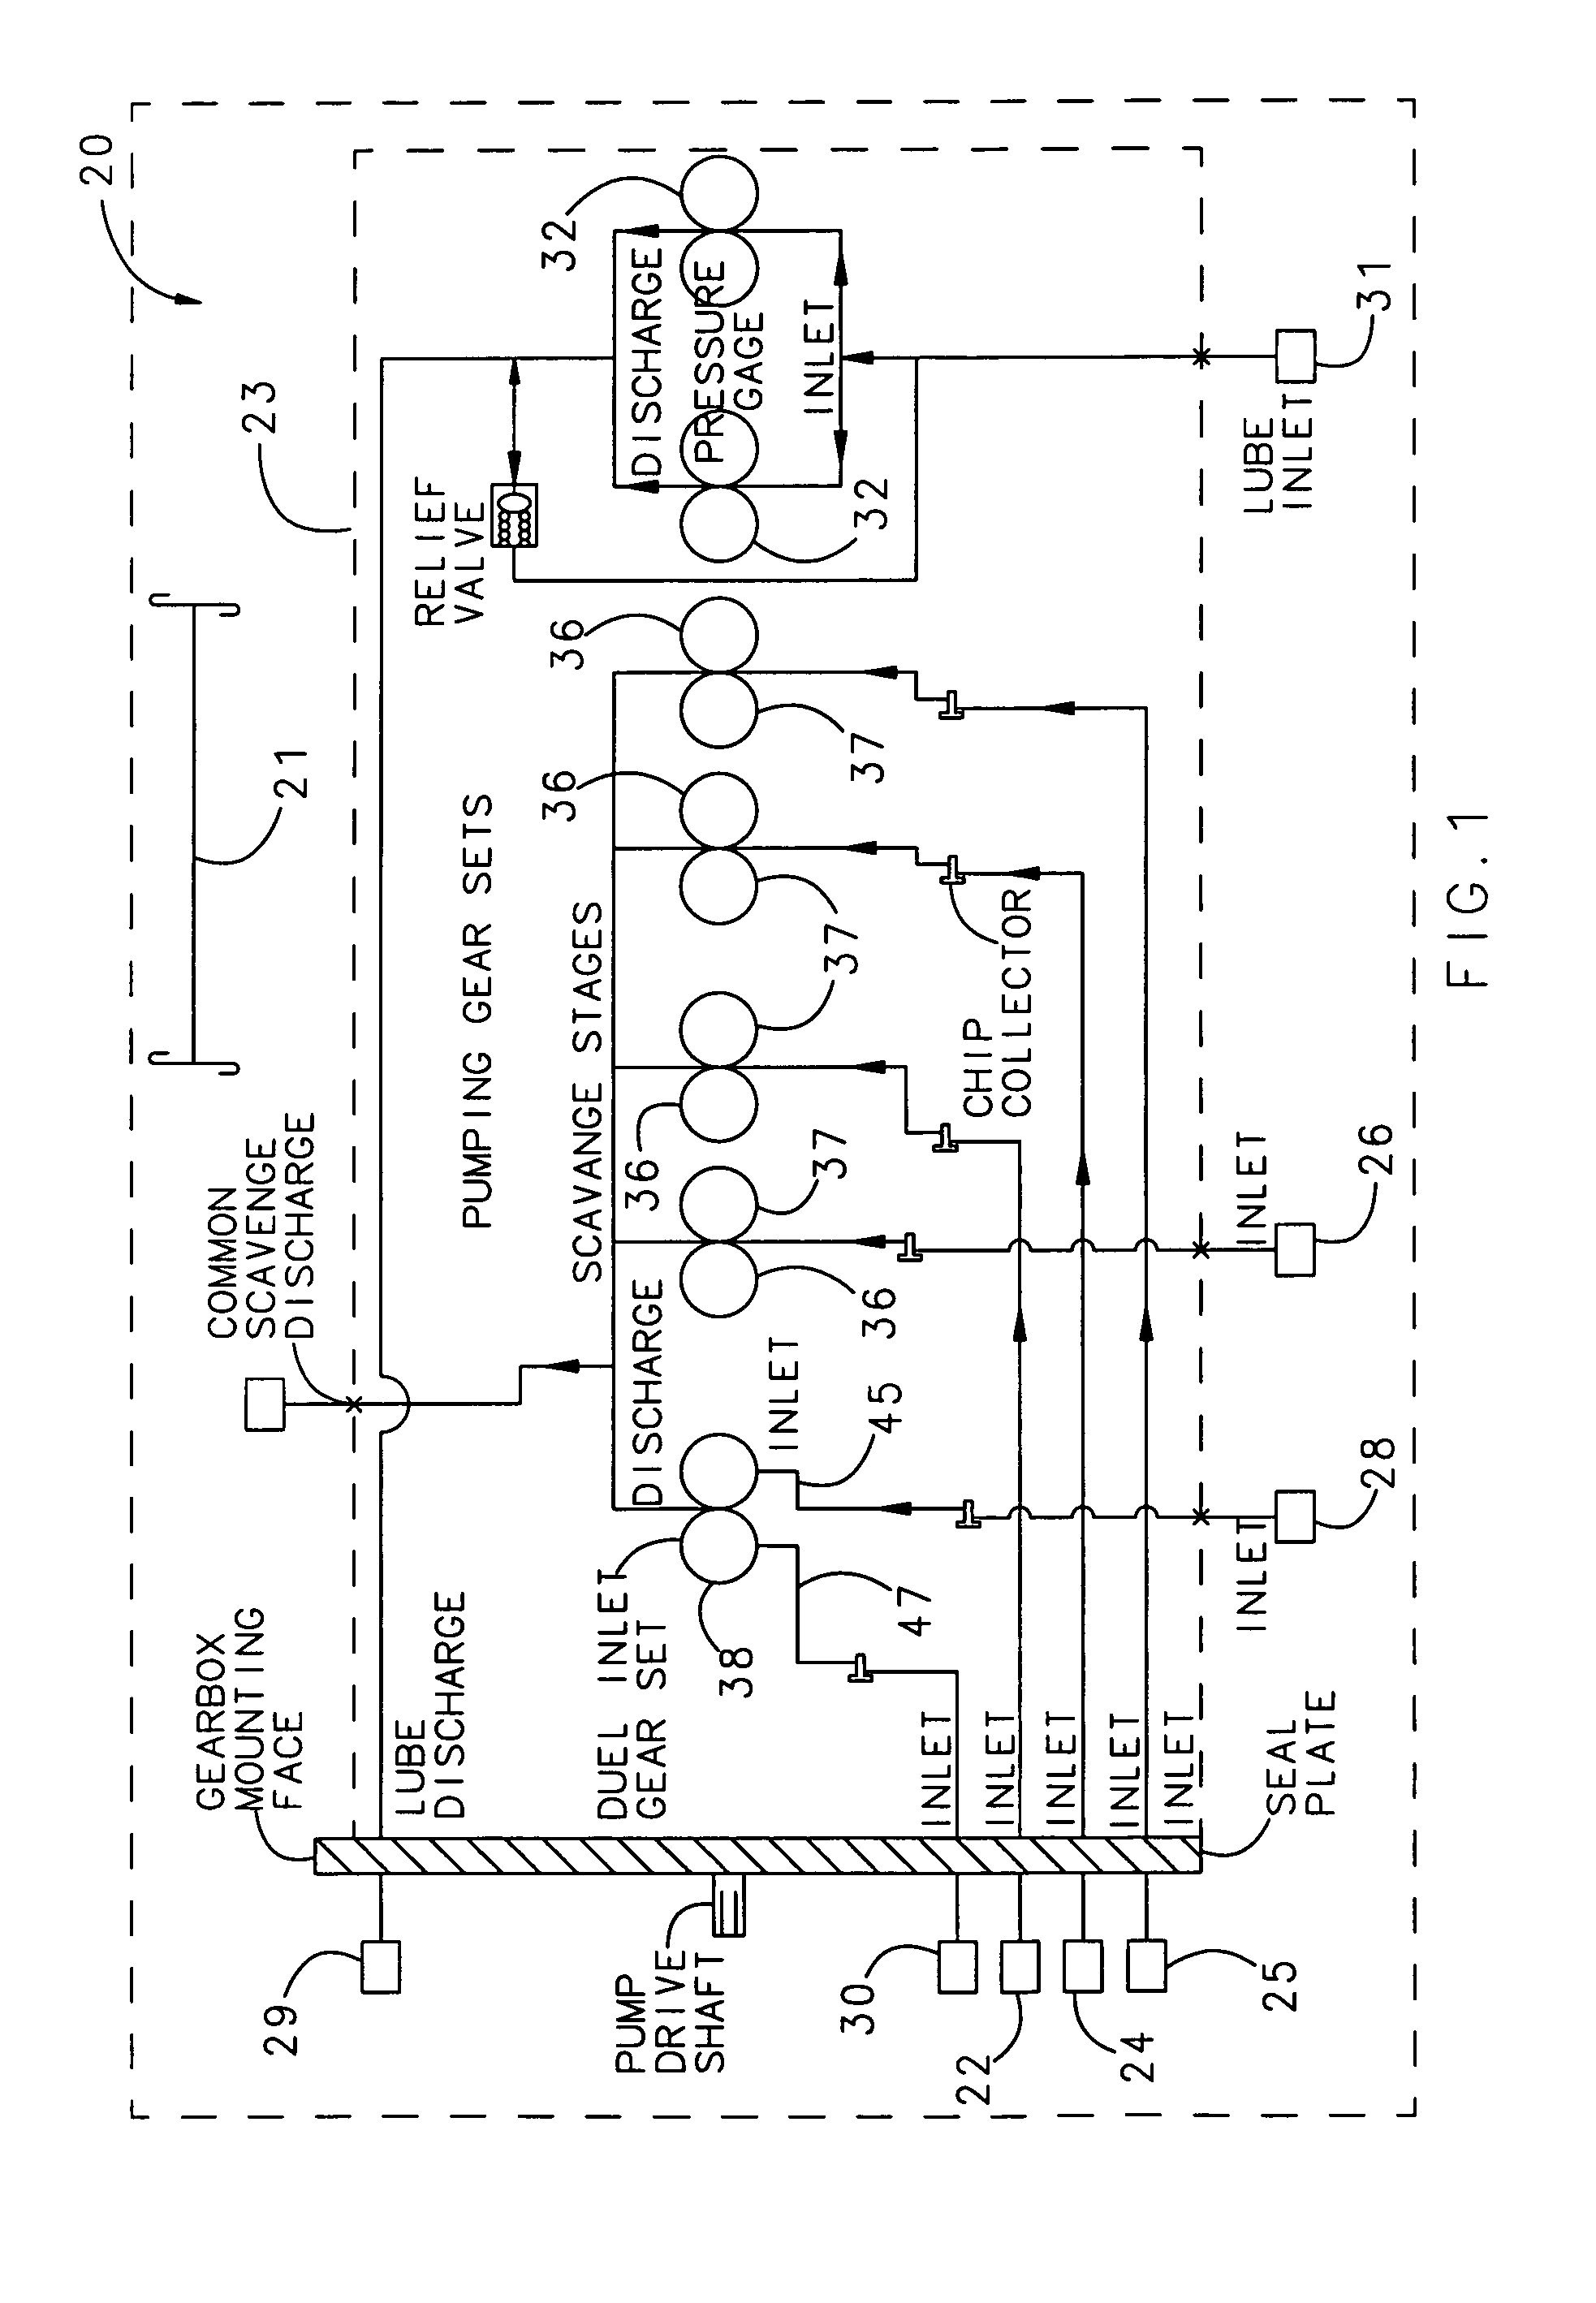 Dual-inlet gear pump with unequal flow capability